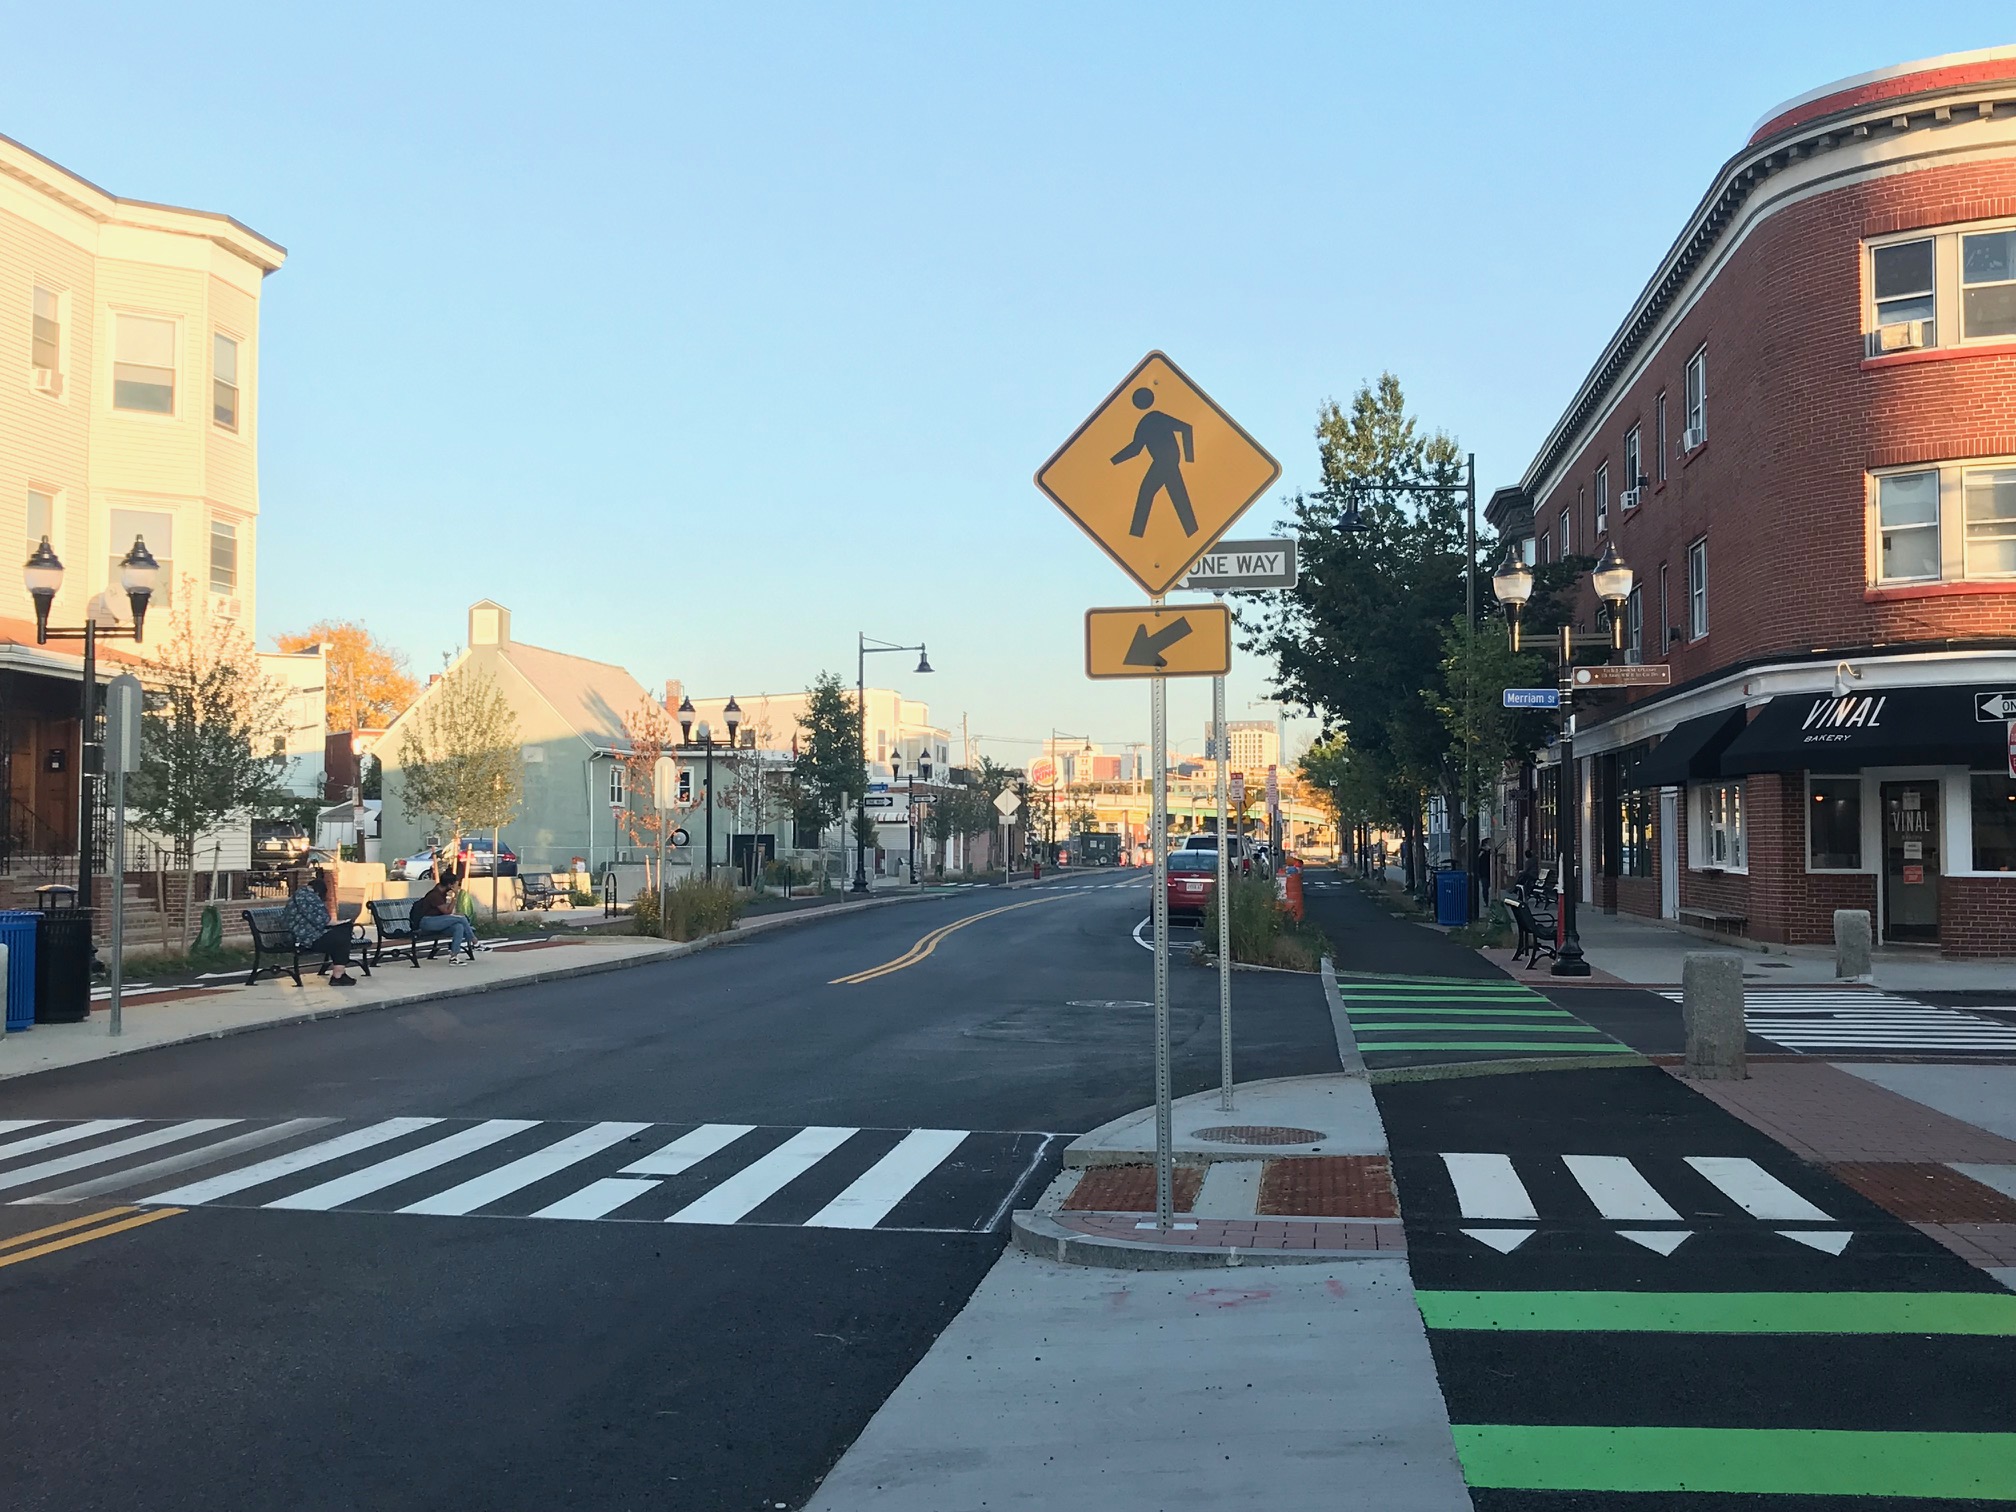 Somerville Ave. features sidewalk-level protected bike paths in each direction, new stormwater collection gardens, and improved sidewalks and crosswalks.